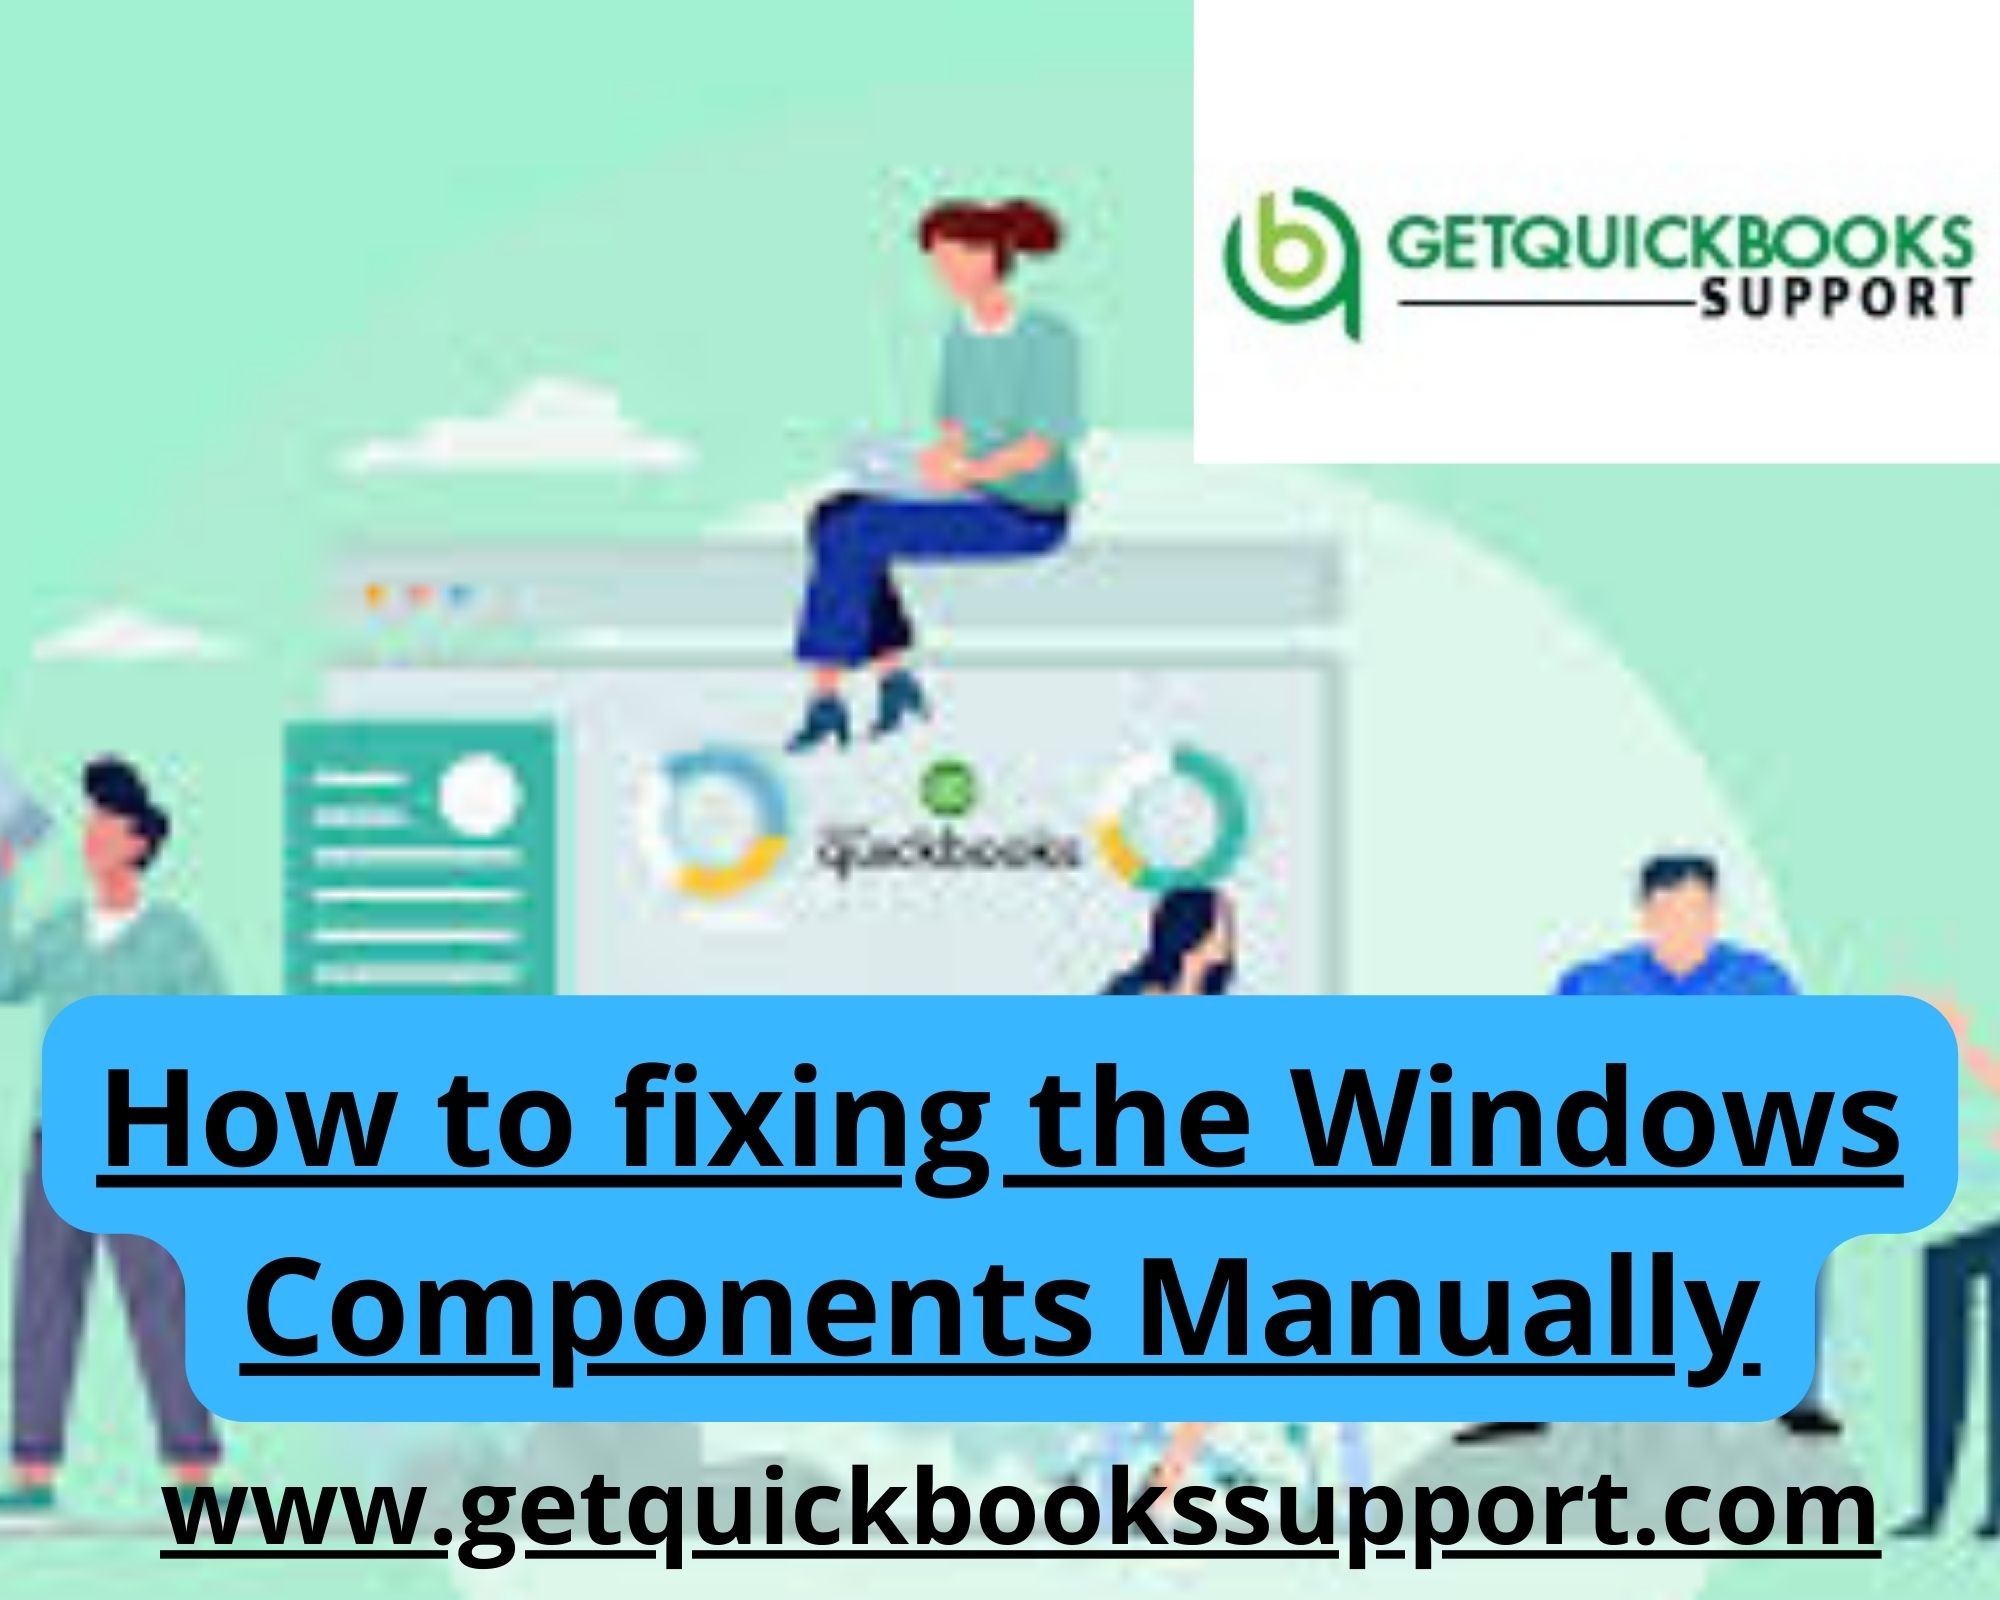 How to fixing the Windows Components Manually